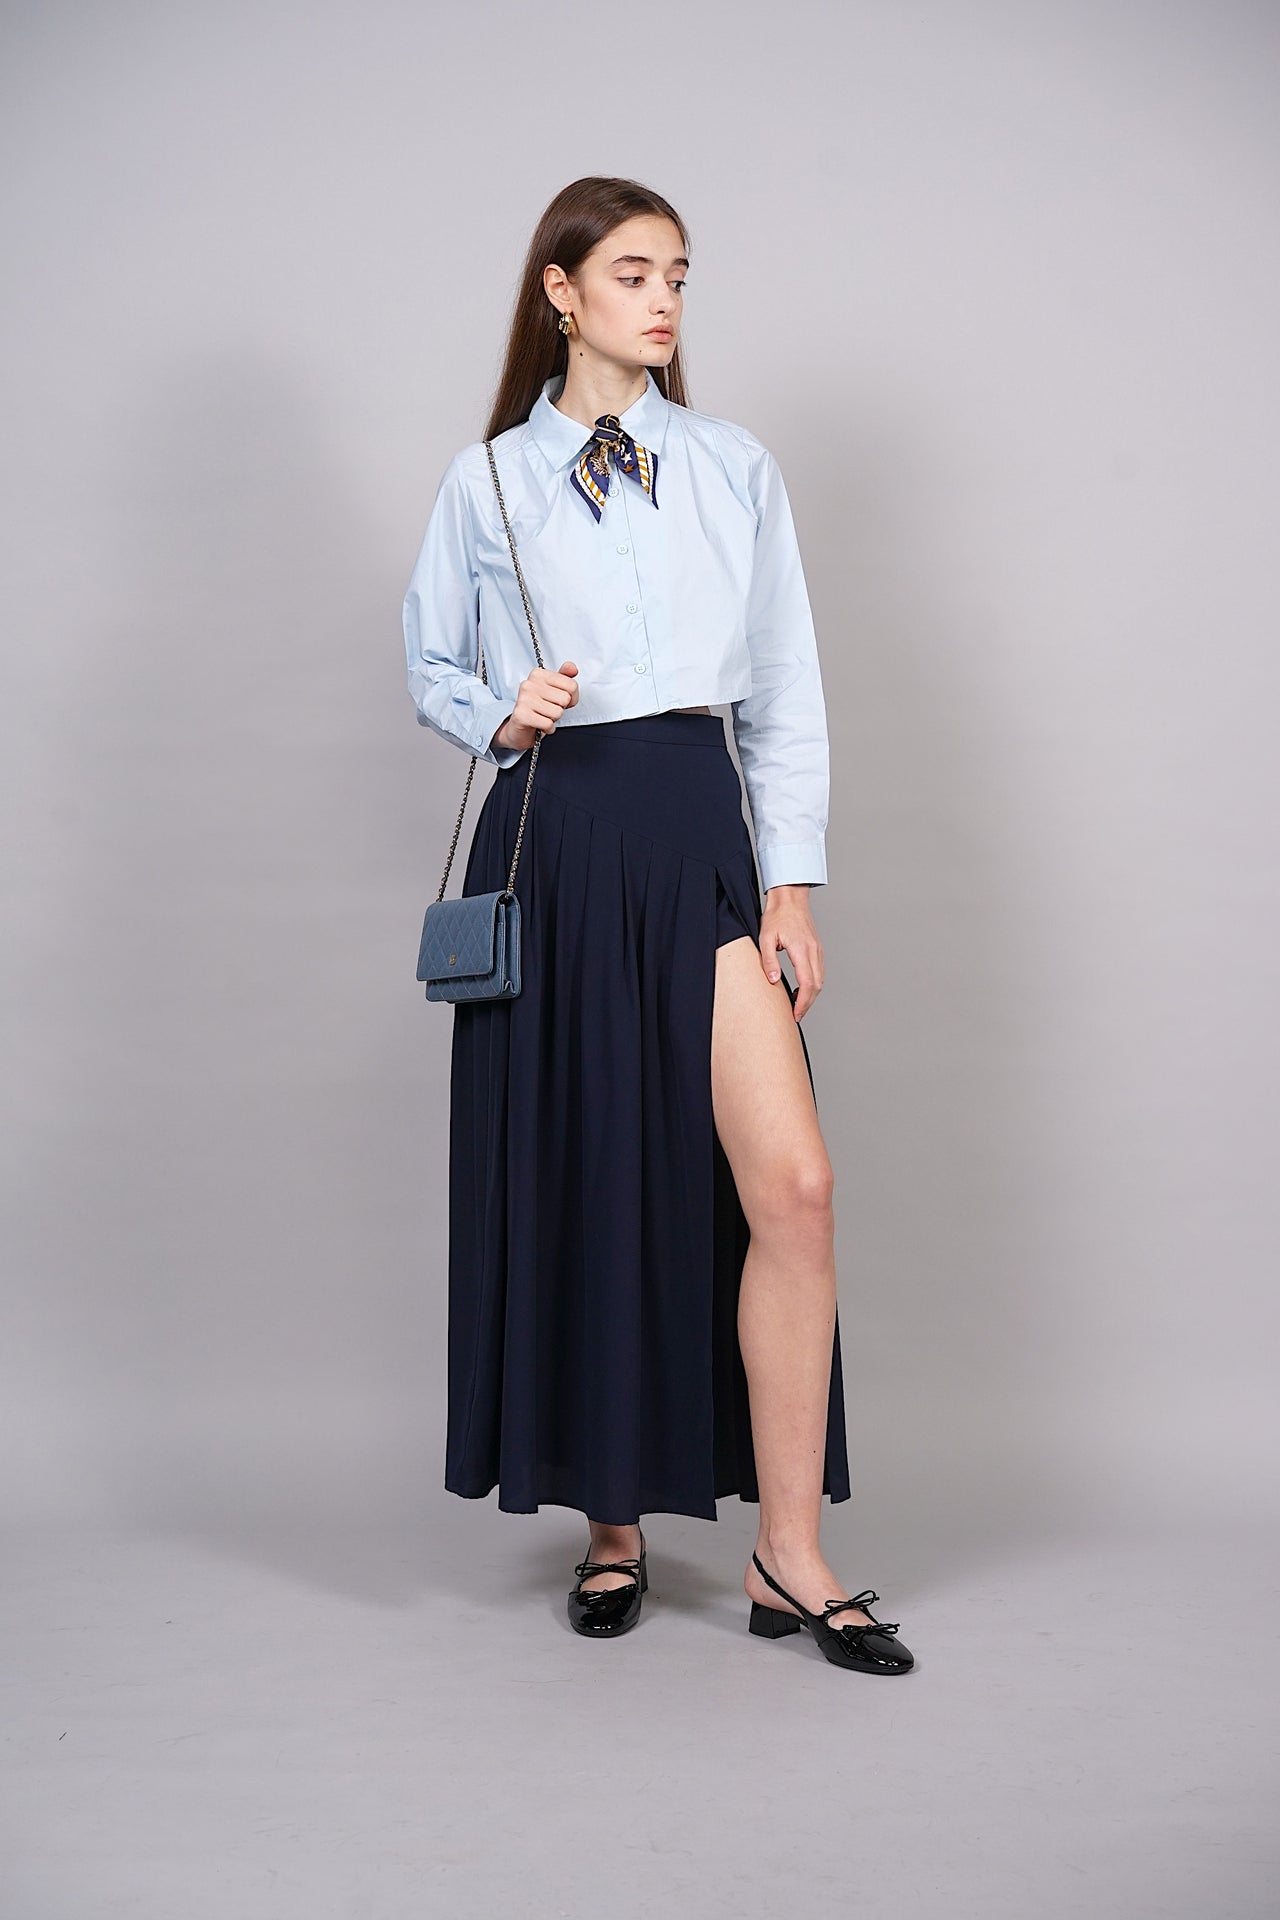 EVERYDAY / Yadiel Buttoned Shirt in Blue